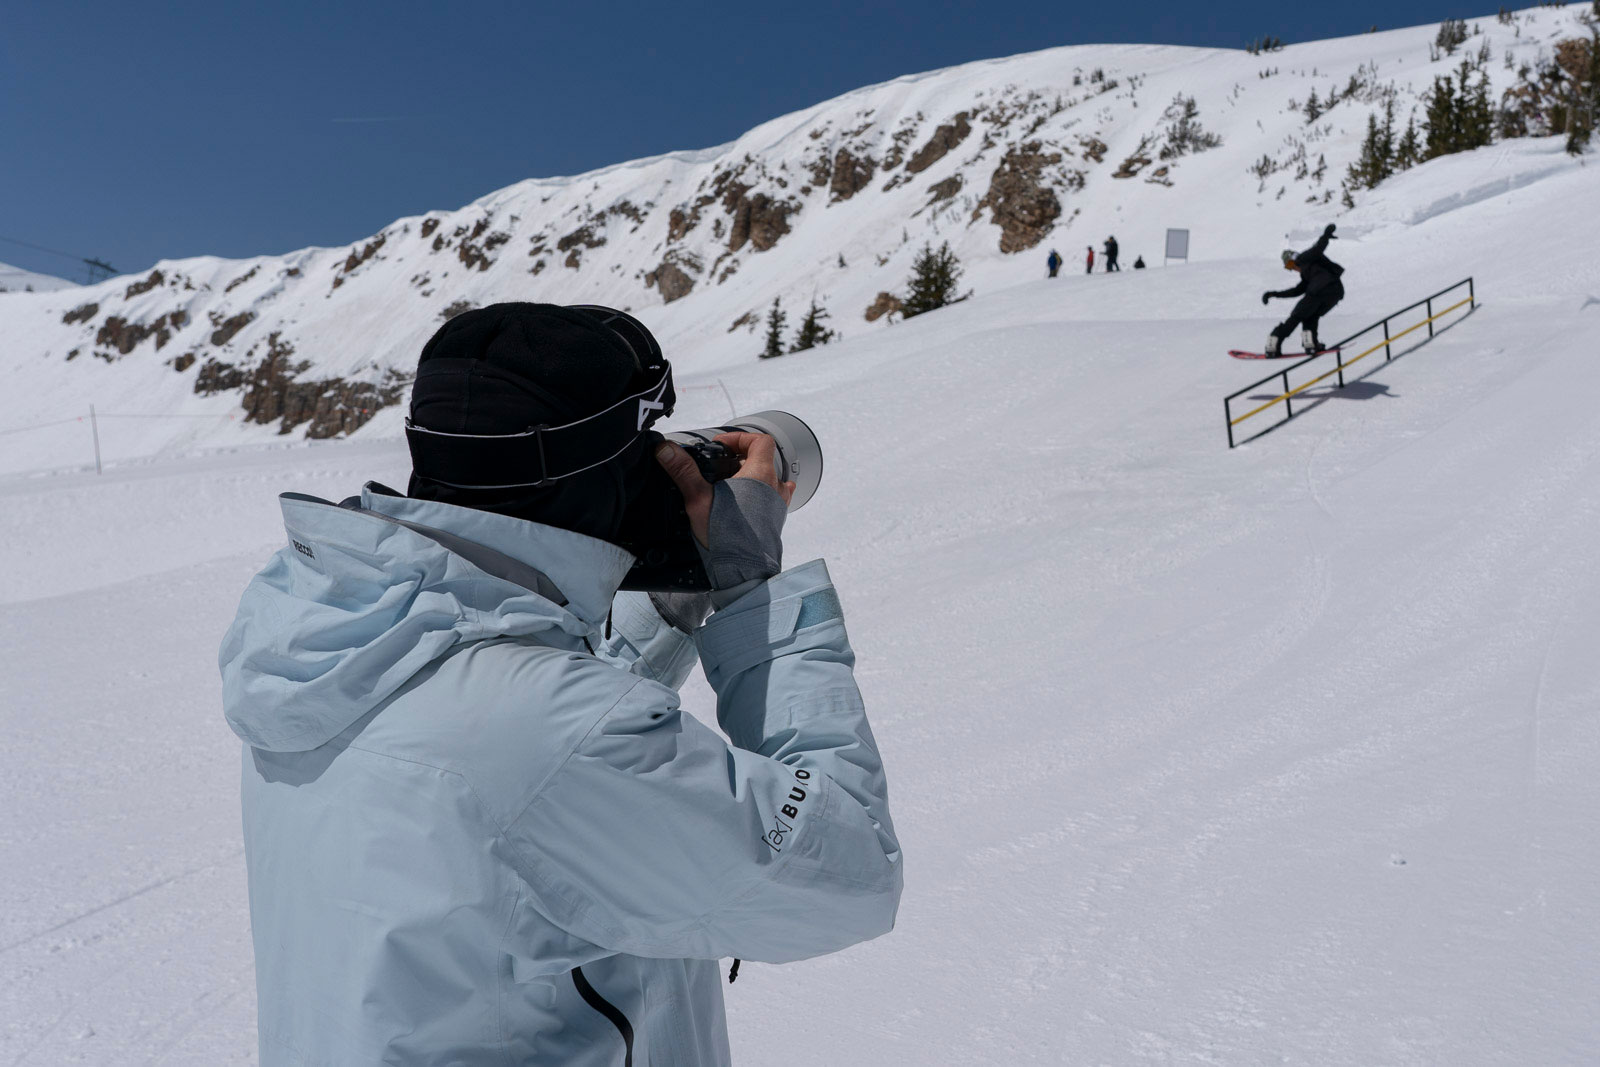 person taking picture on ski hill of person snowboarding on rail in terrain park